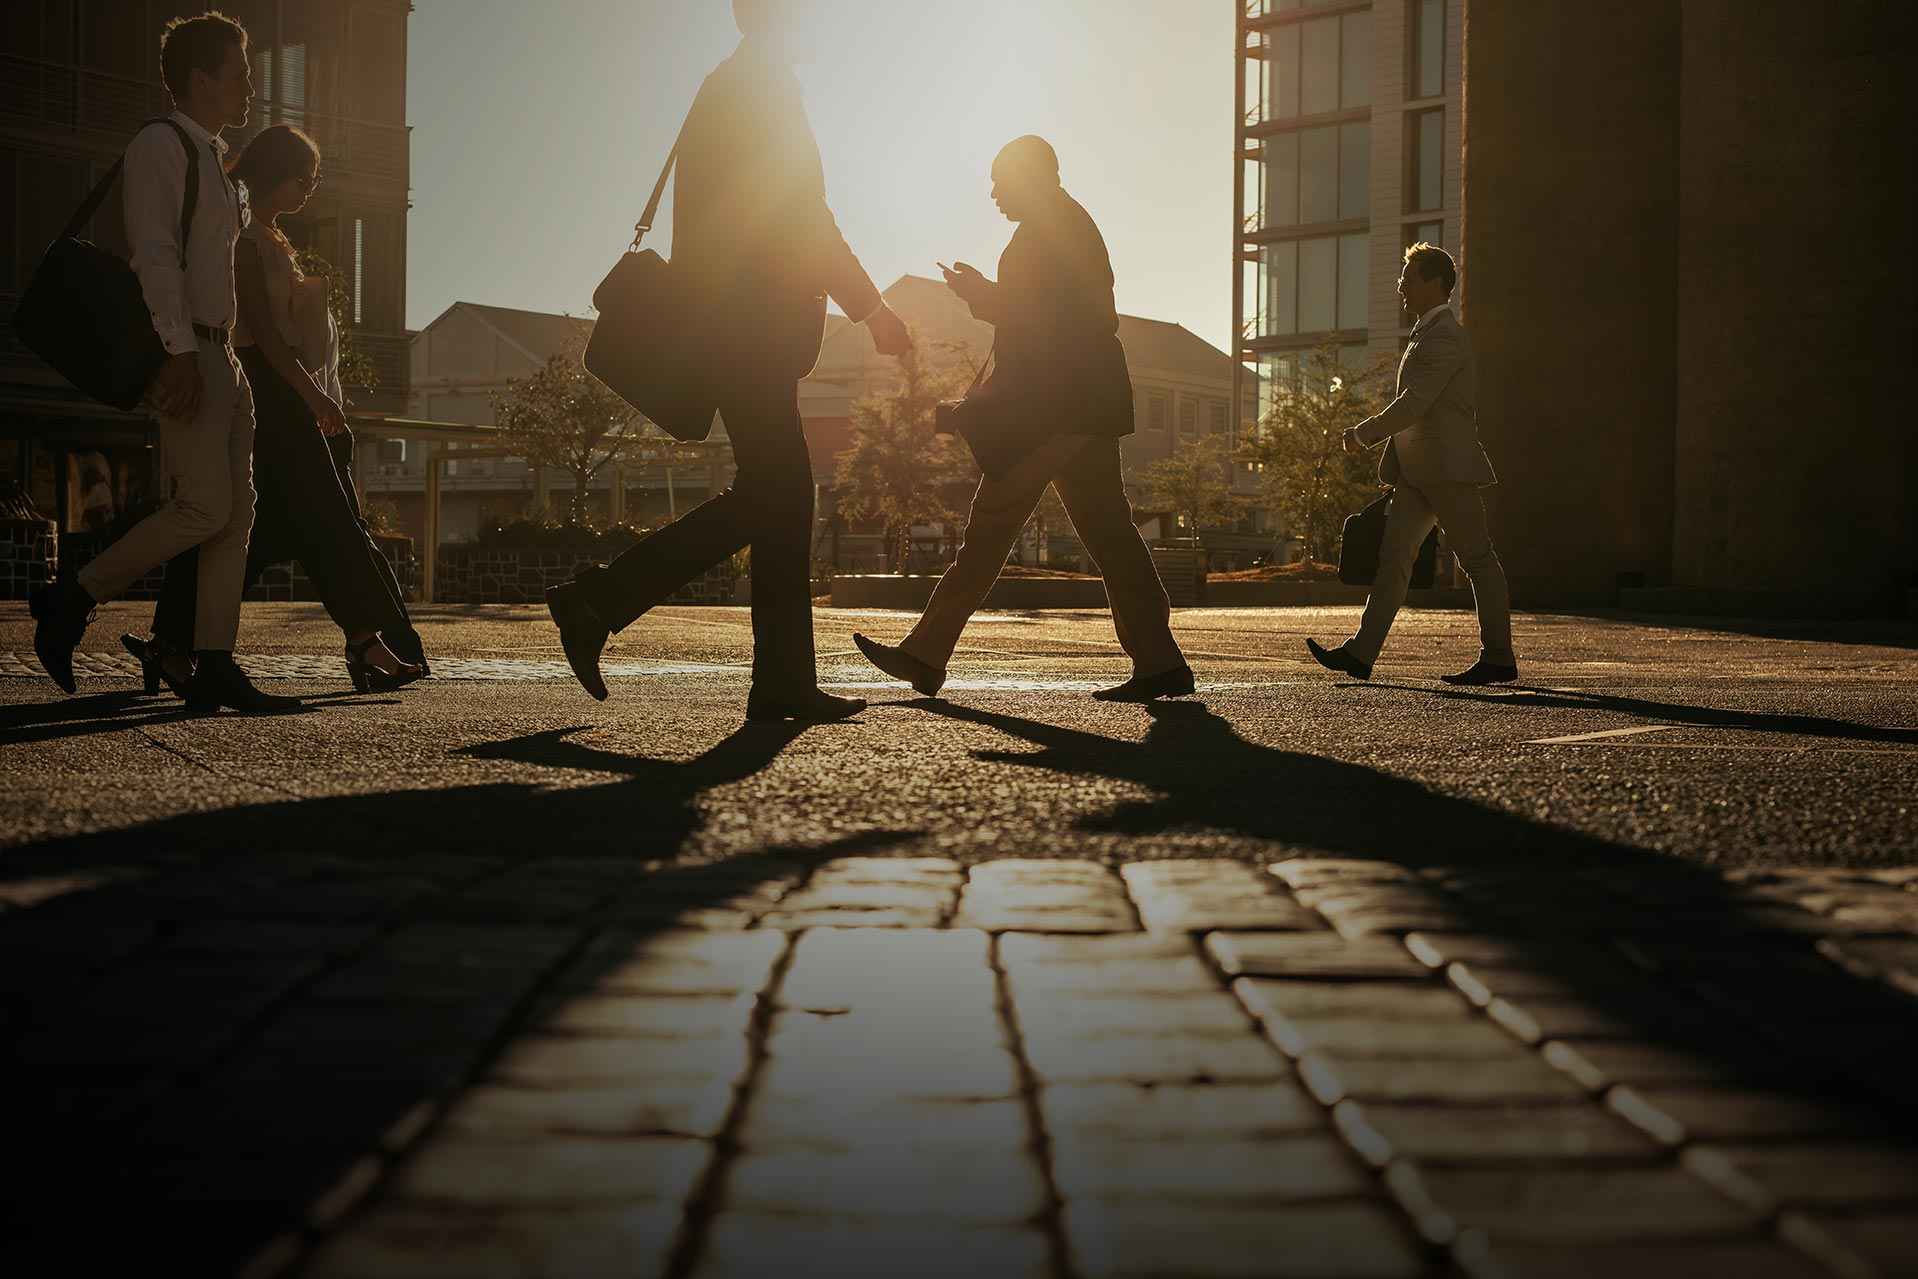 People walking on a cobbled street in the evening sun